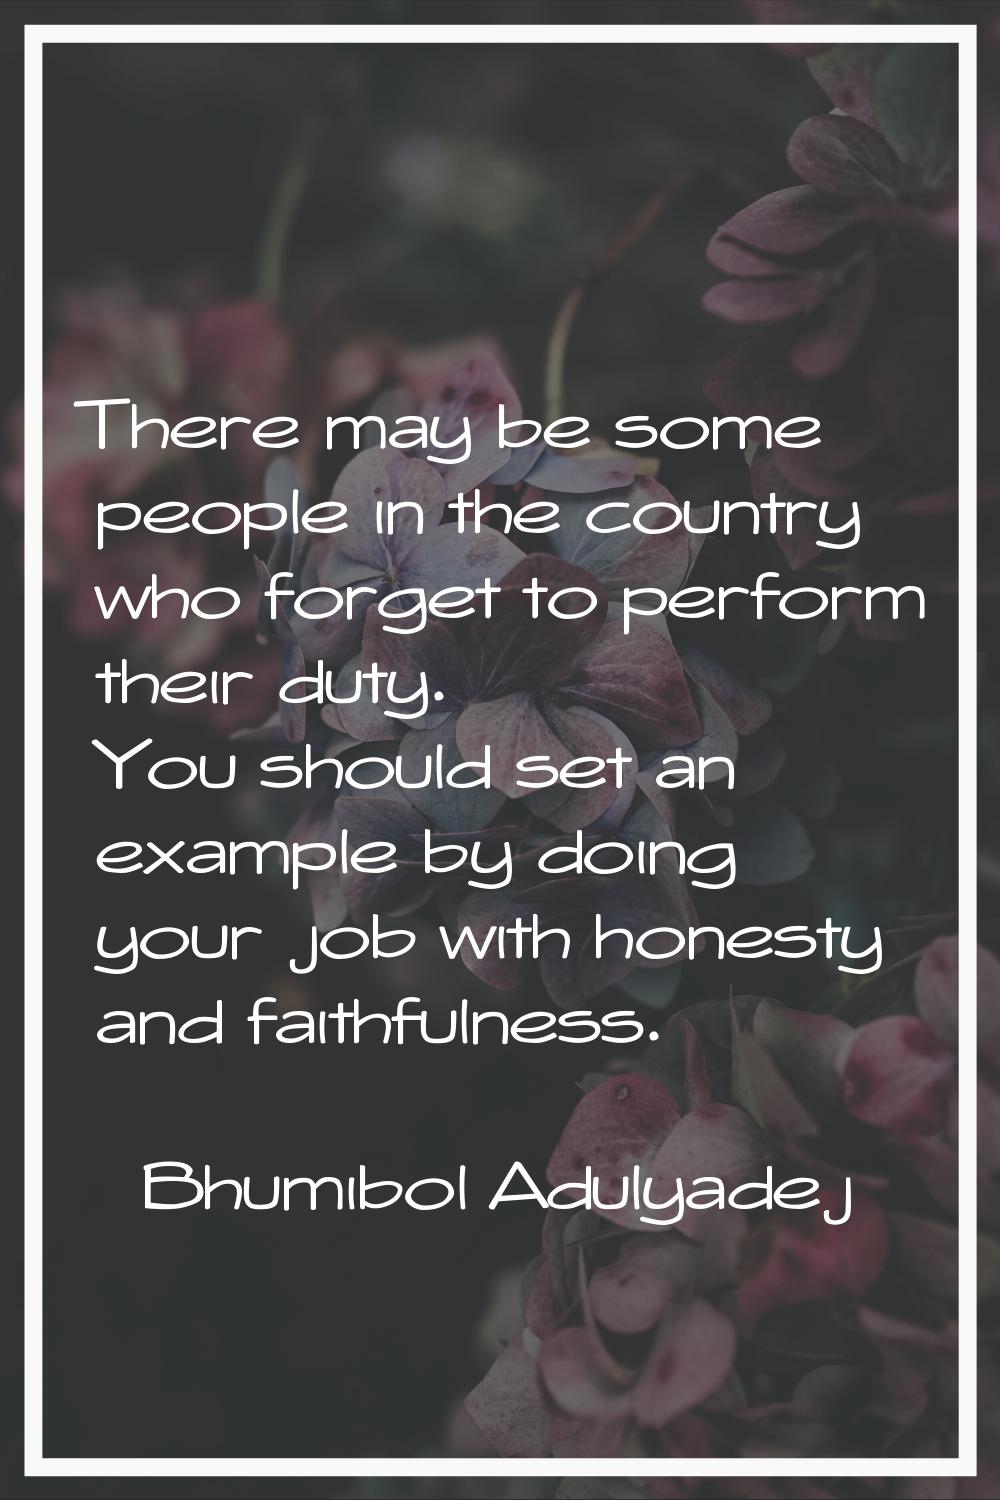 There may be some people in the country who forget to perform their duty. You should set an example